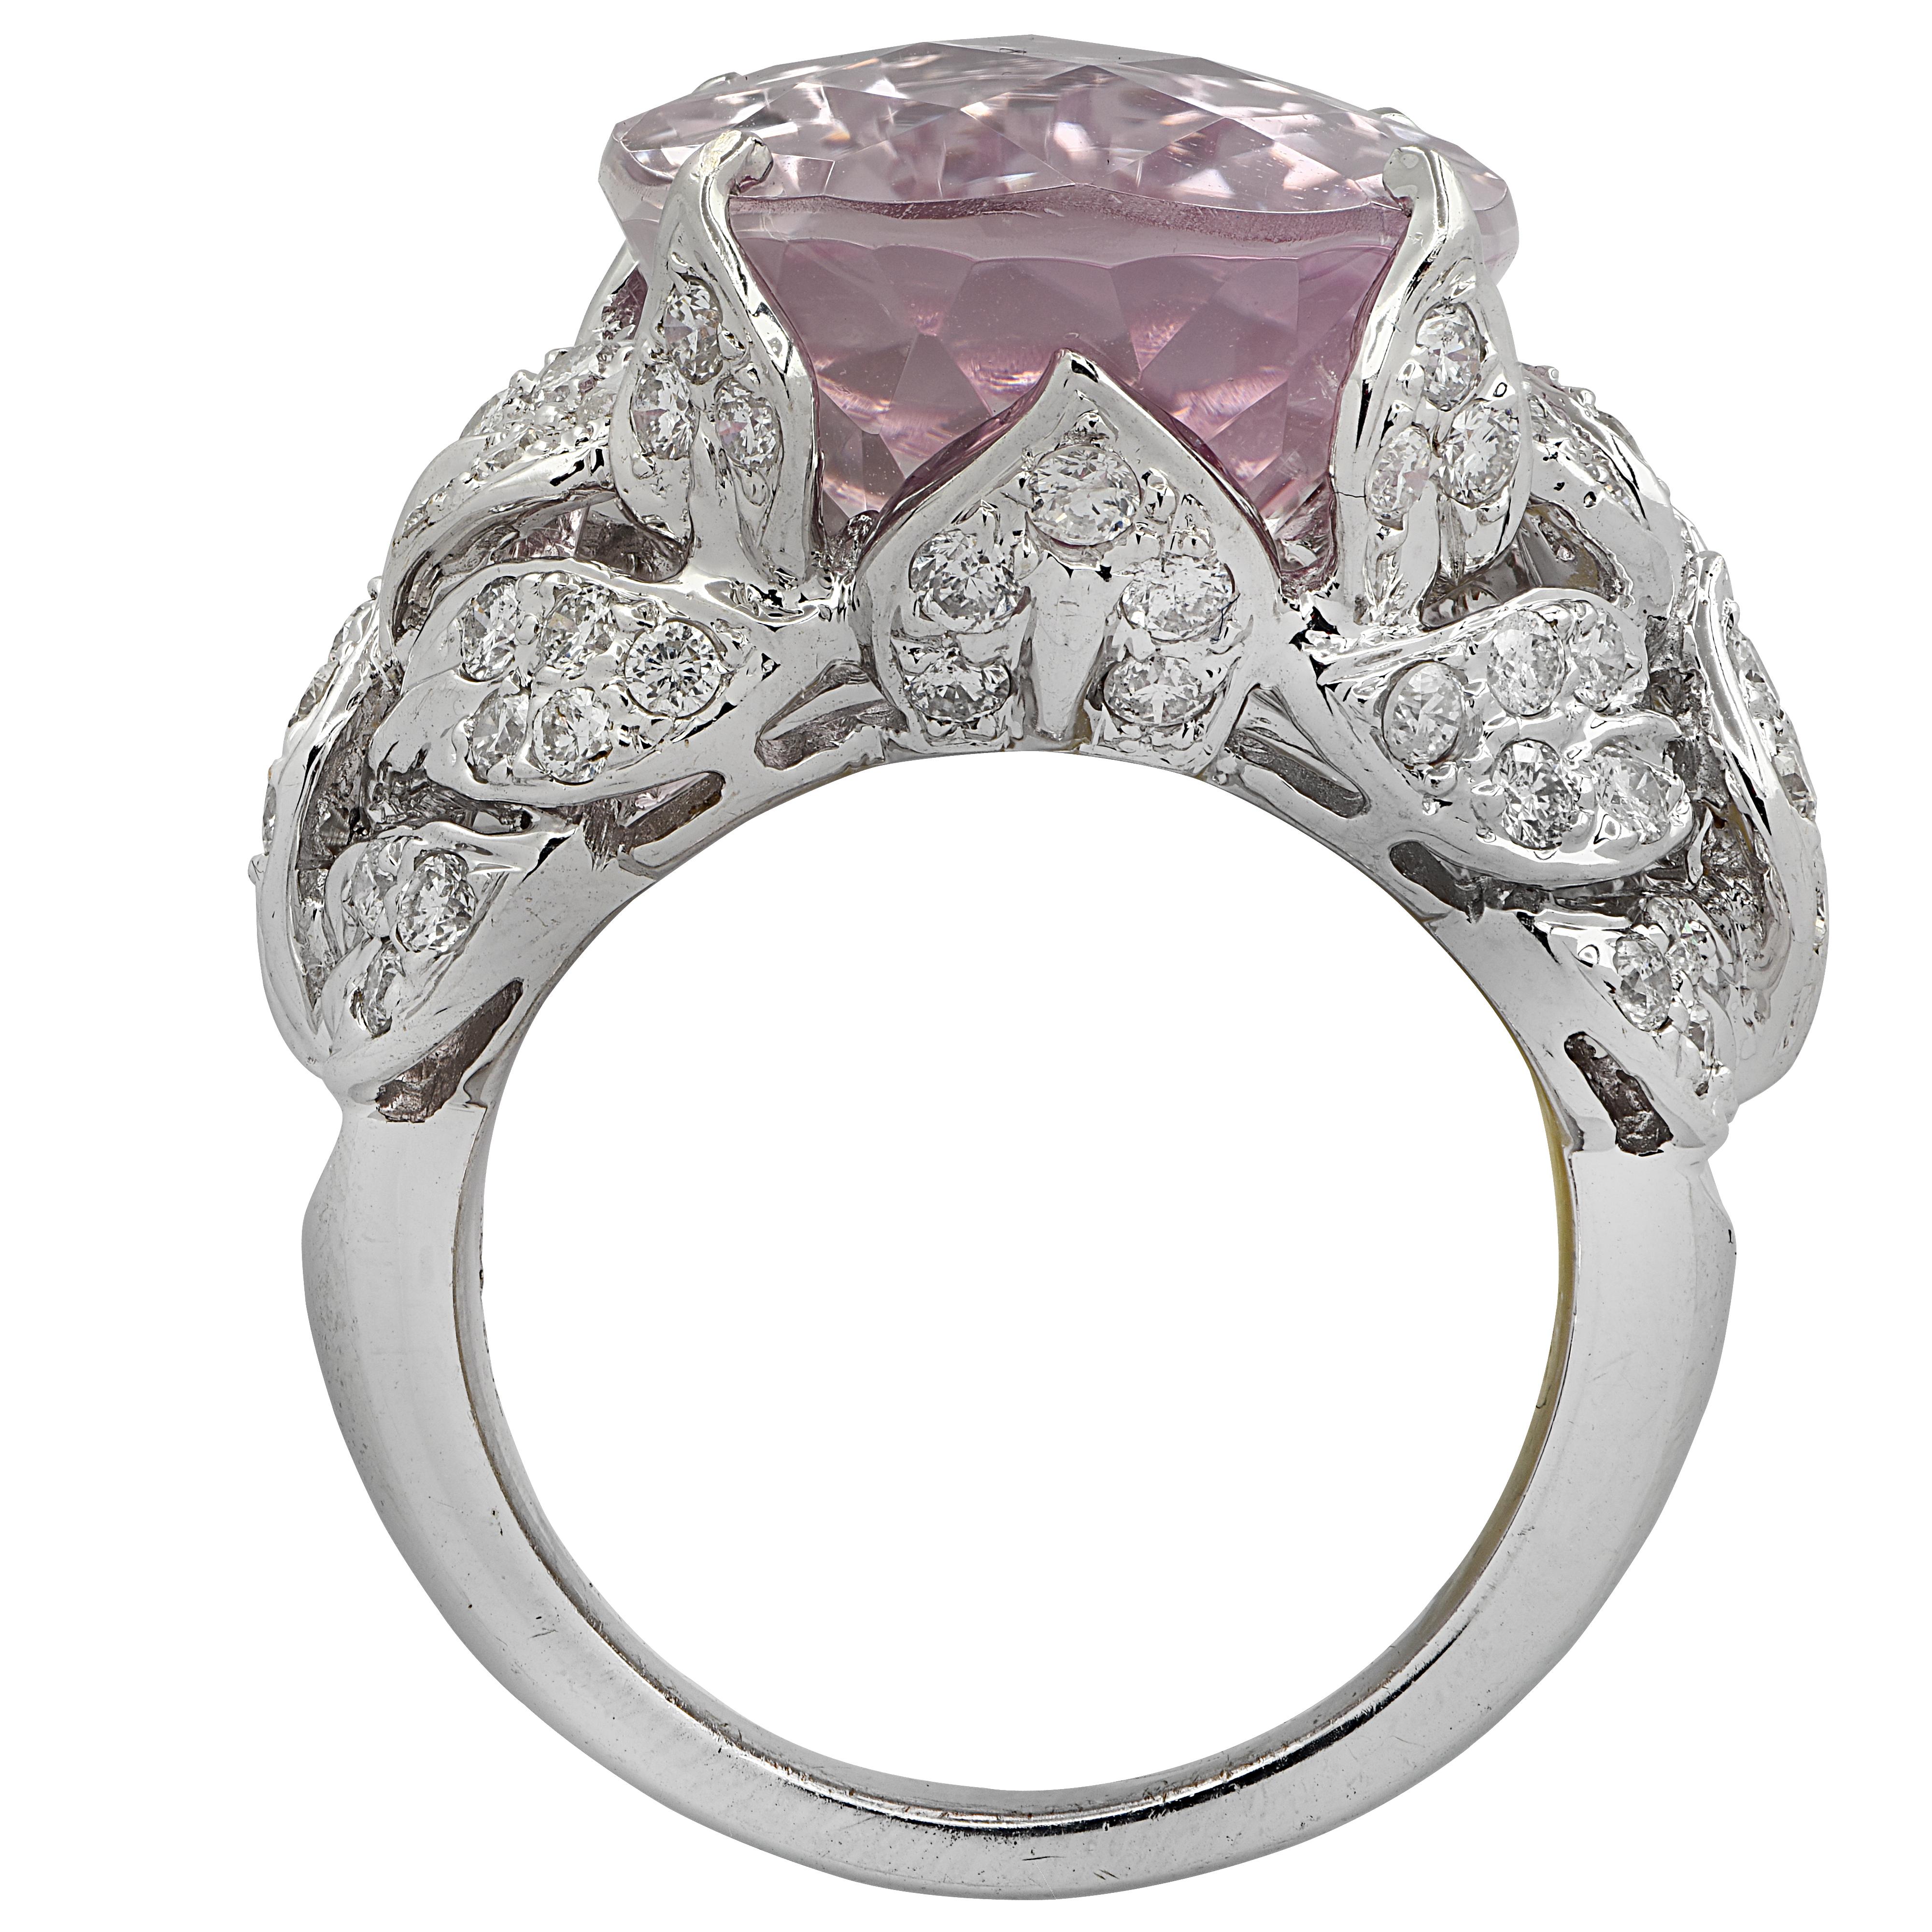 Spectacular cocktail ring crafted in 18 karat white gold showcasing a gorgeous pink oval fantasy cut Kunzite weighing approximately 19.22 carats and 80 round brilliant cut diamonds weighing approximately 1.32 carats total, G color, VS-SI clarity.